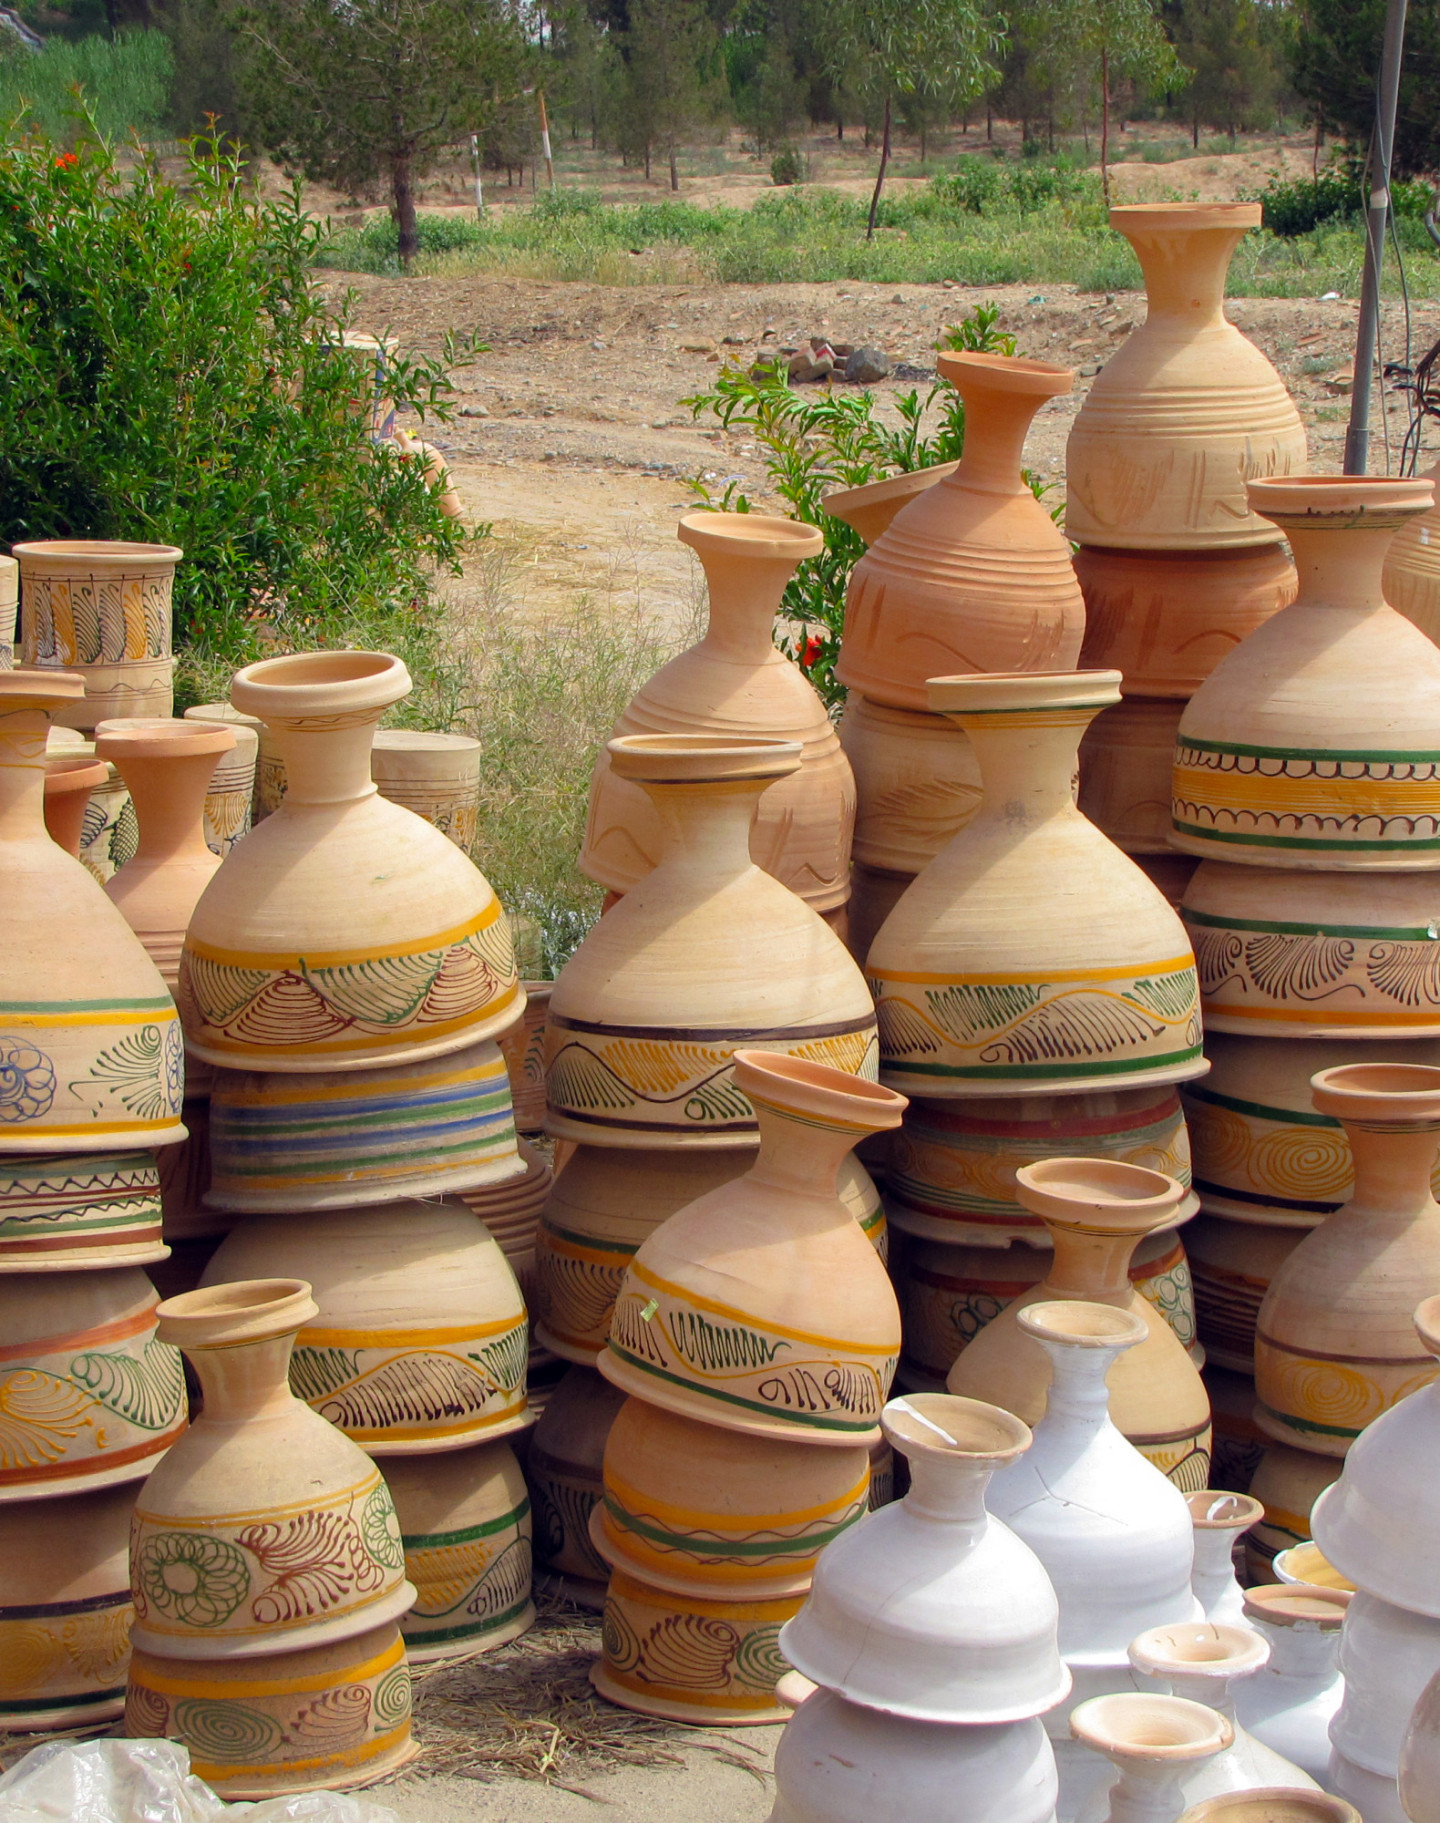 Stacked pottery, some painted white, other pieces decorated in patterns. Behind a dirt path a cluster of trees